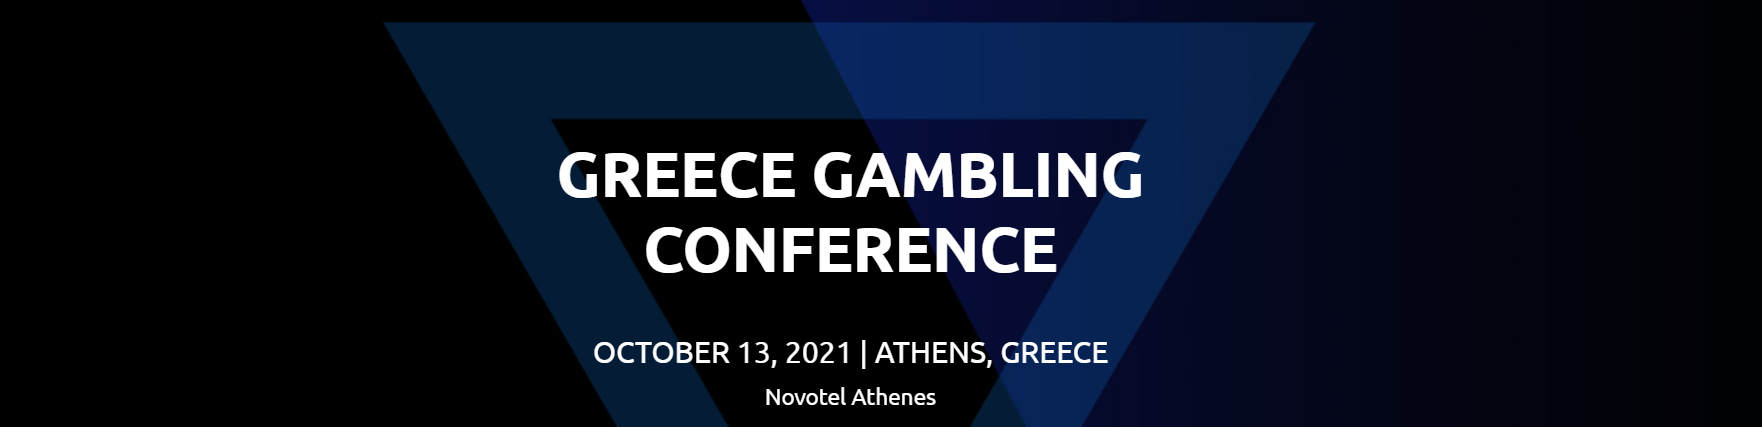 Greece Gambling Conference 2021